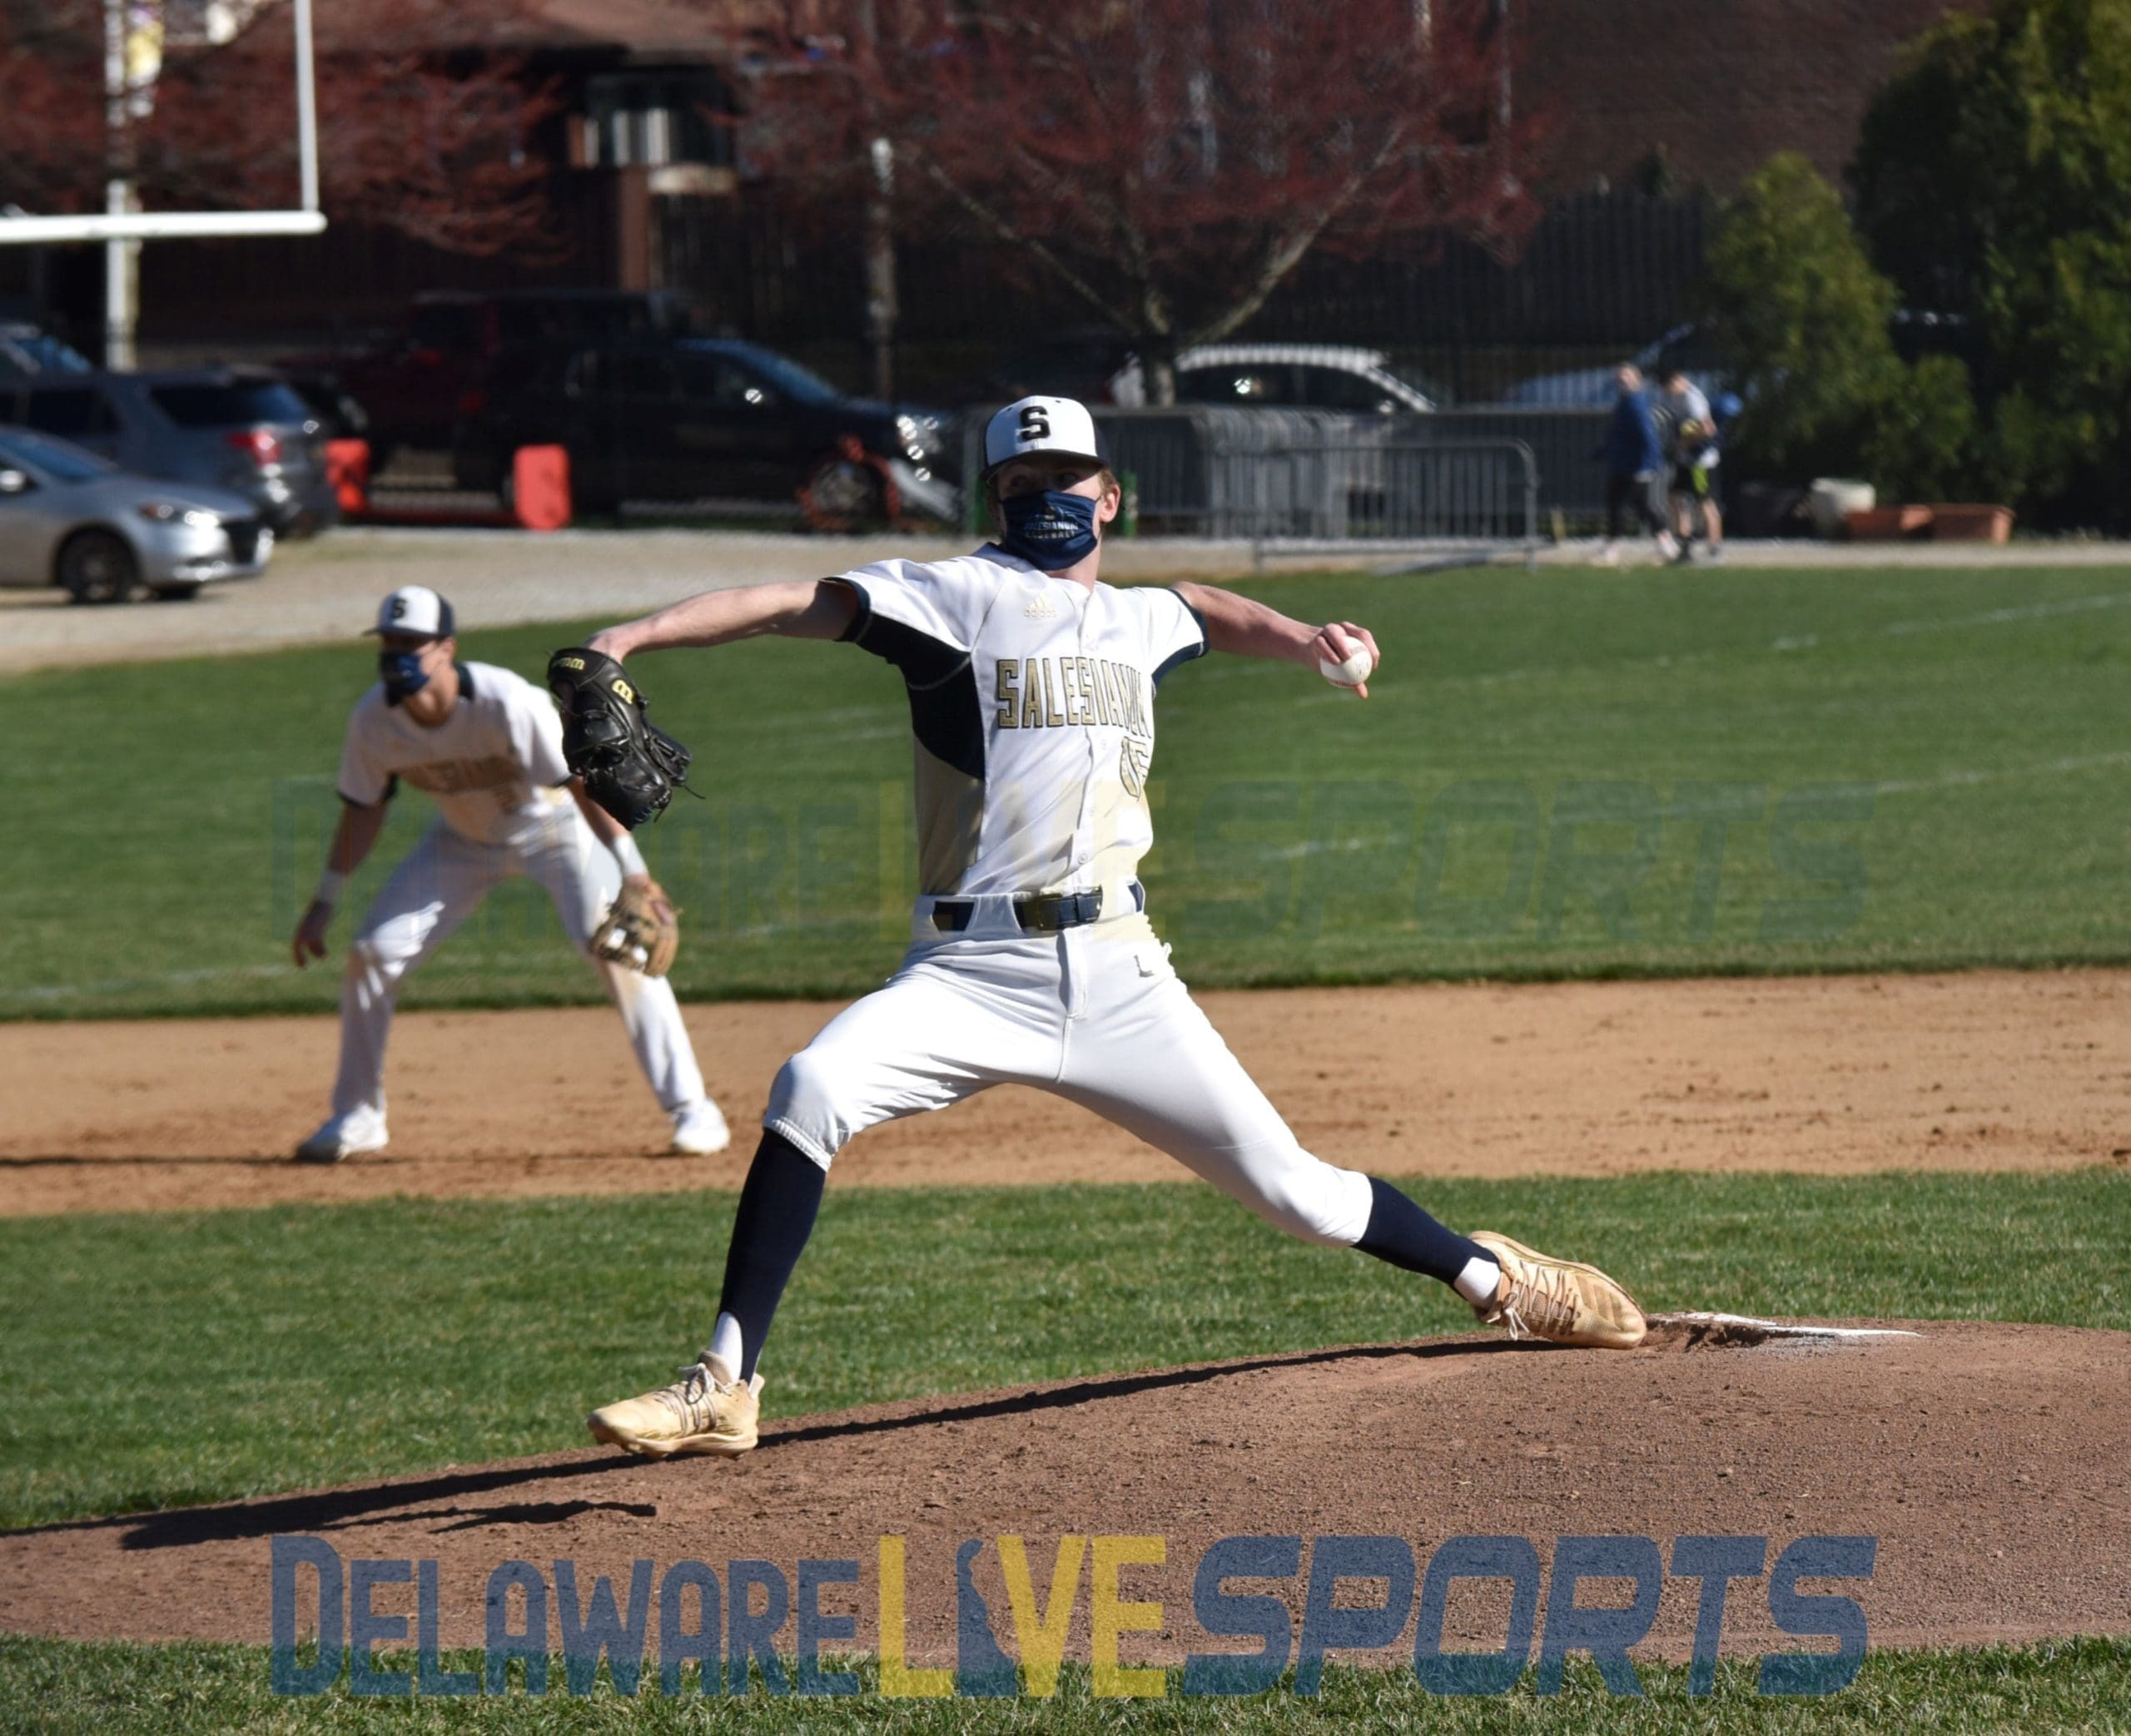 Featured image for “Salesianum vs St Georges Tech baseball photos”